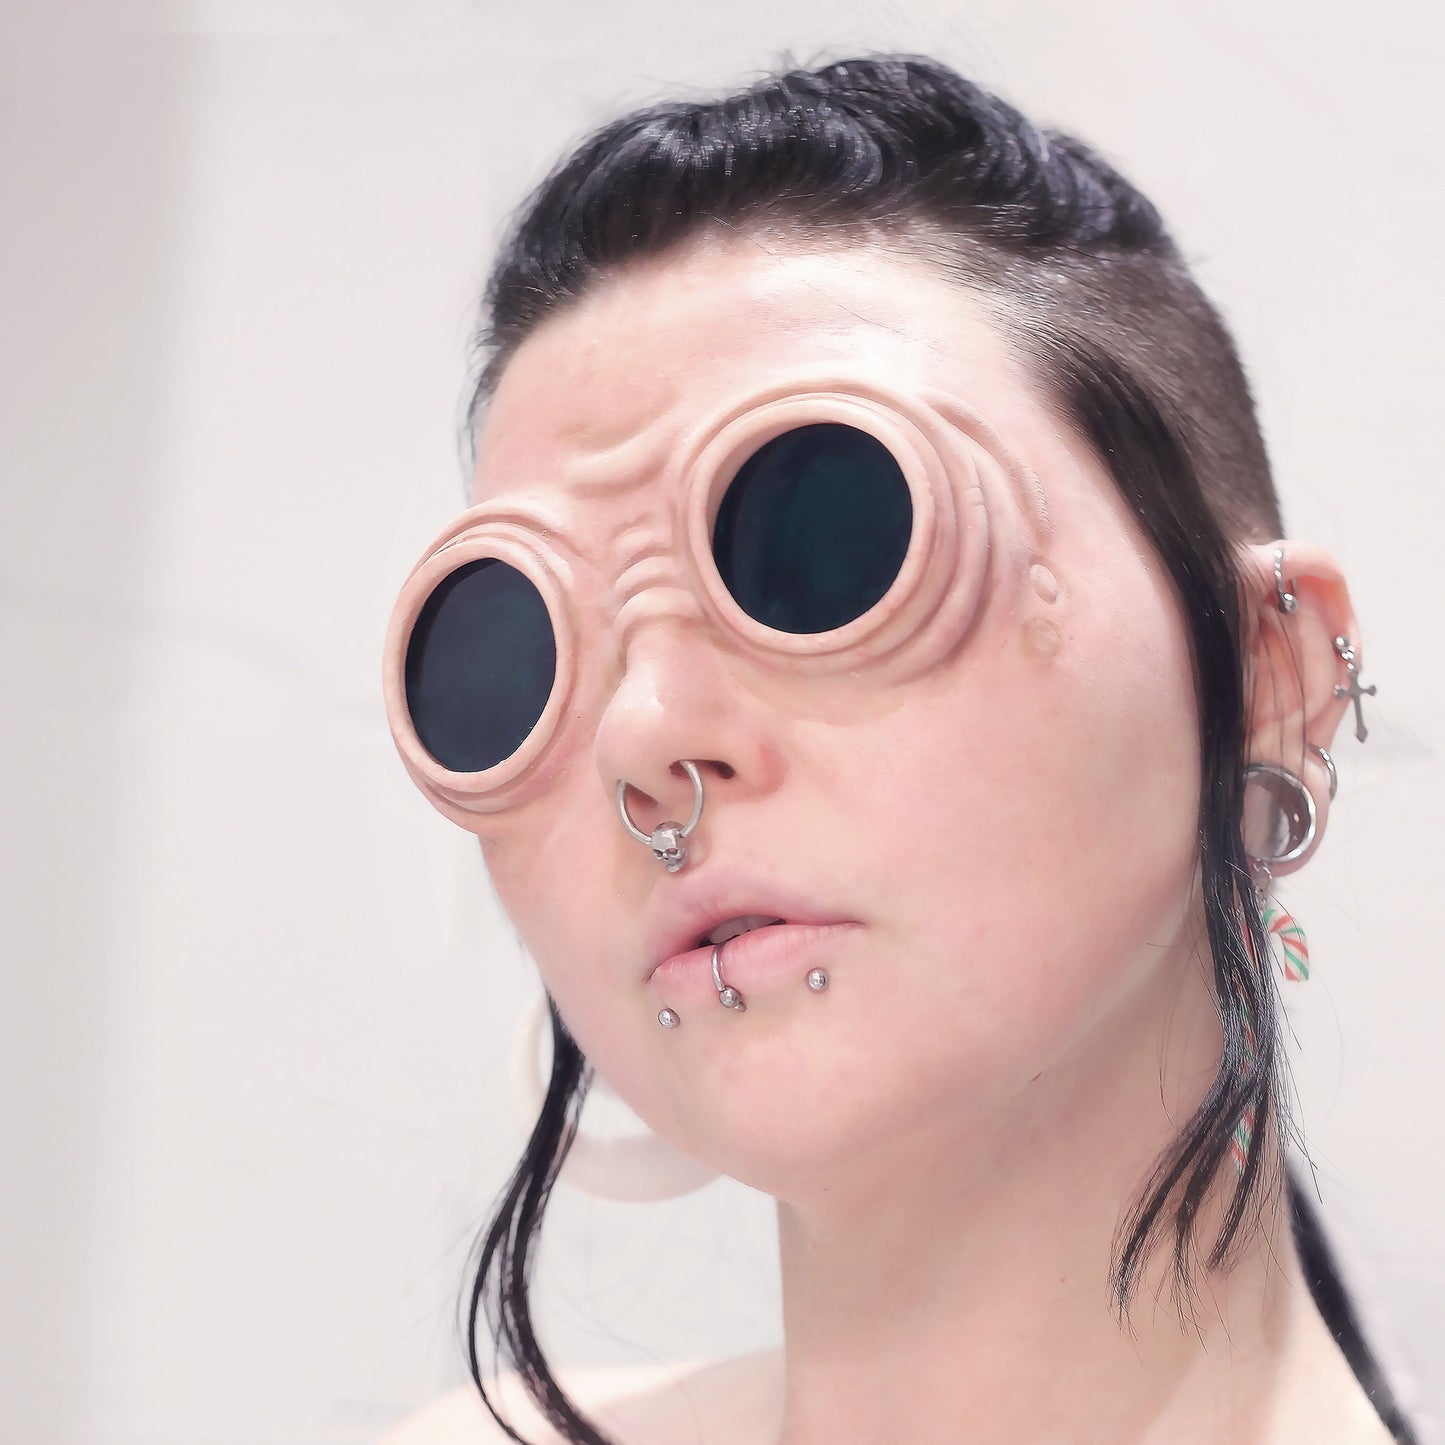 Woman with a black braid wearing goggles prosthetics